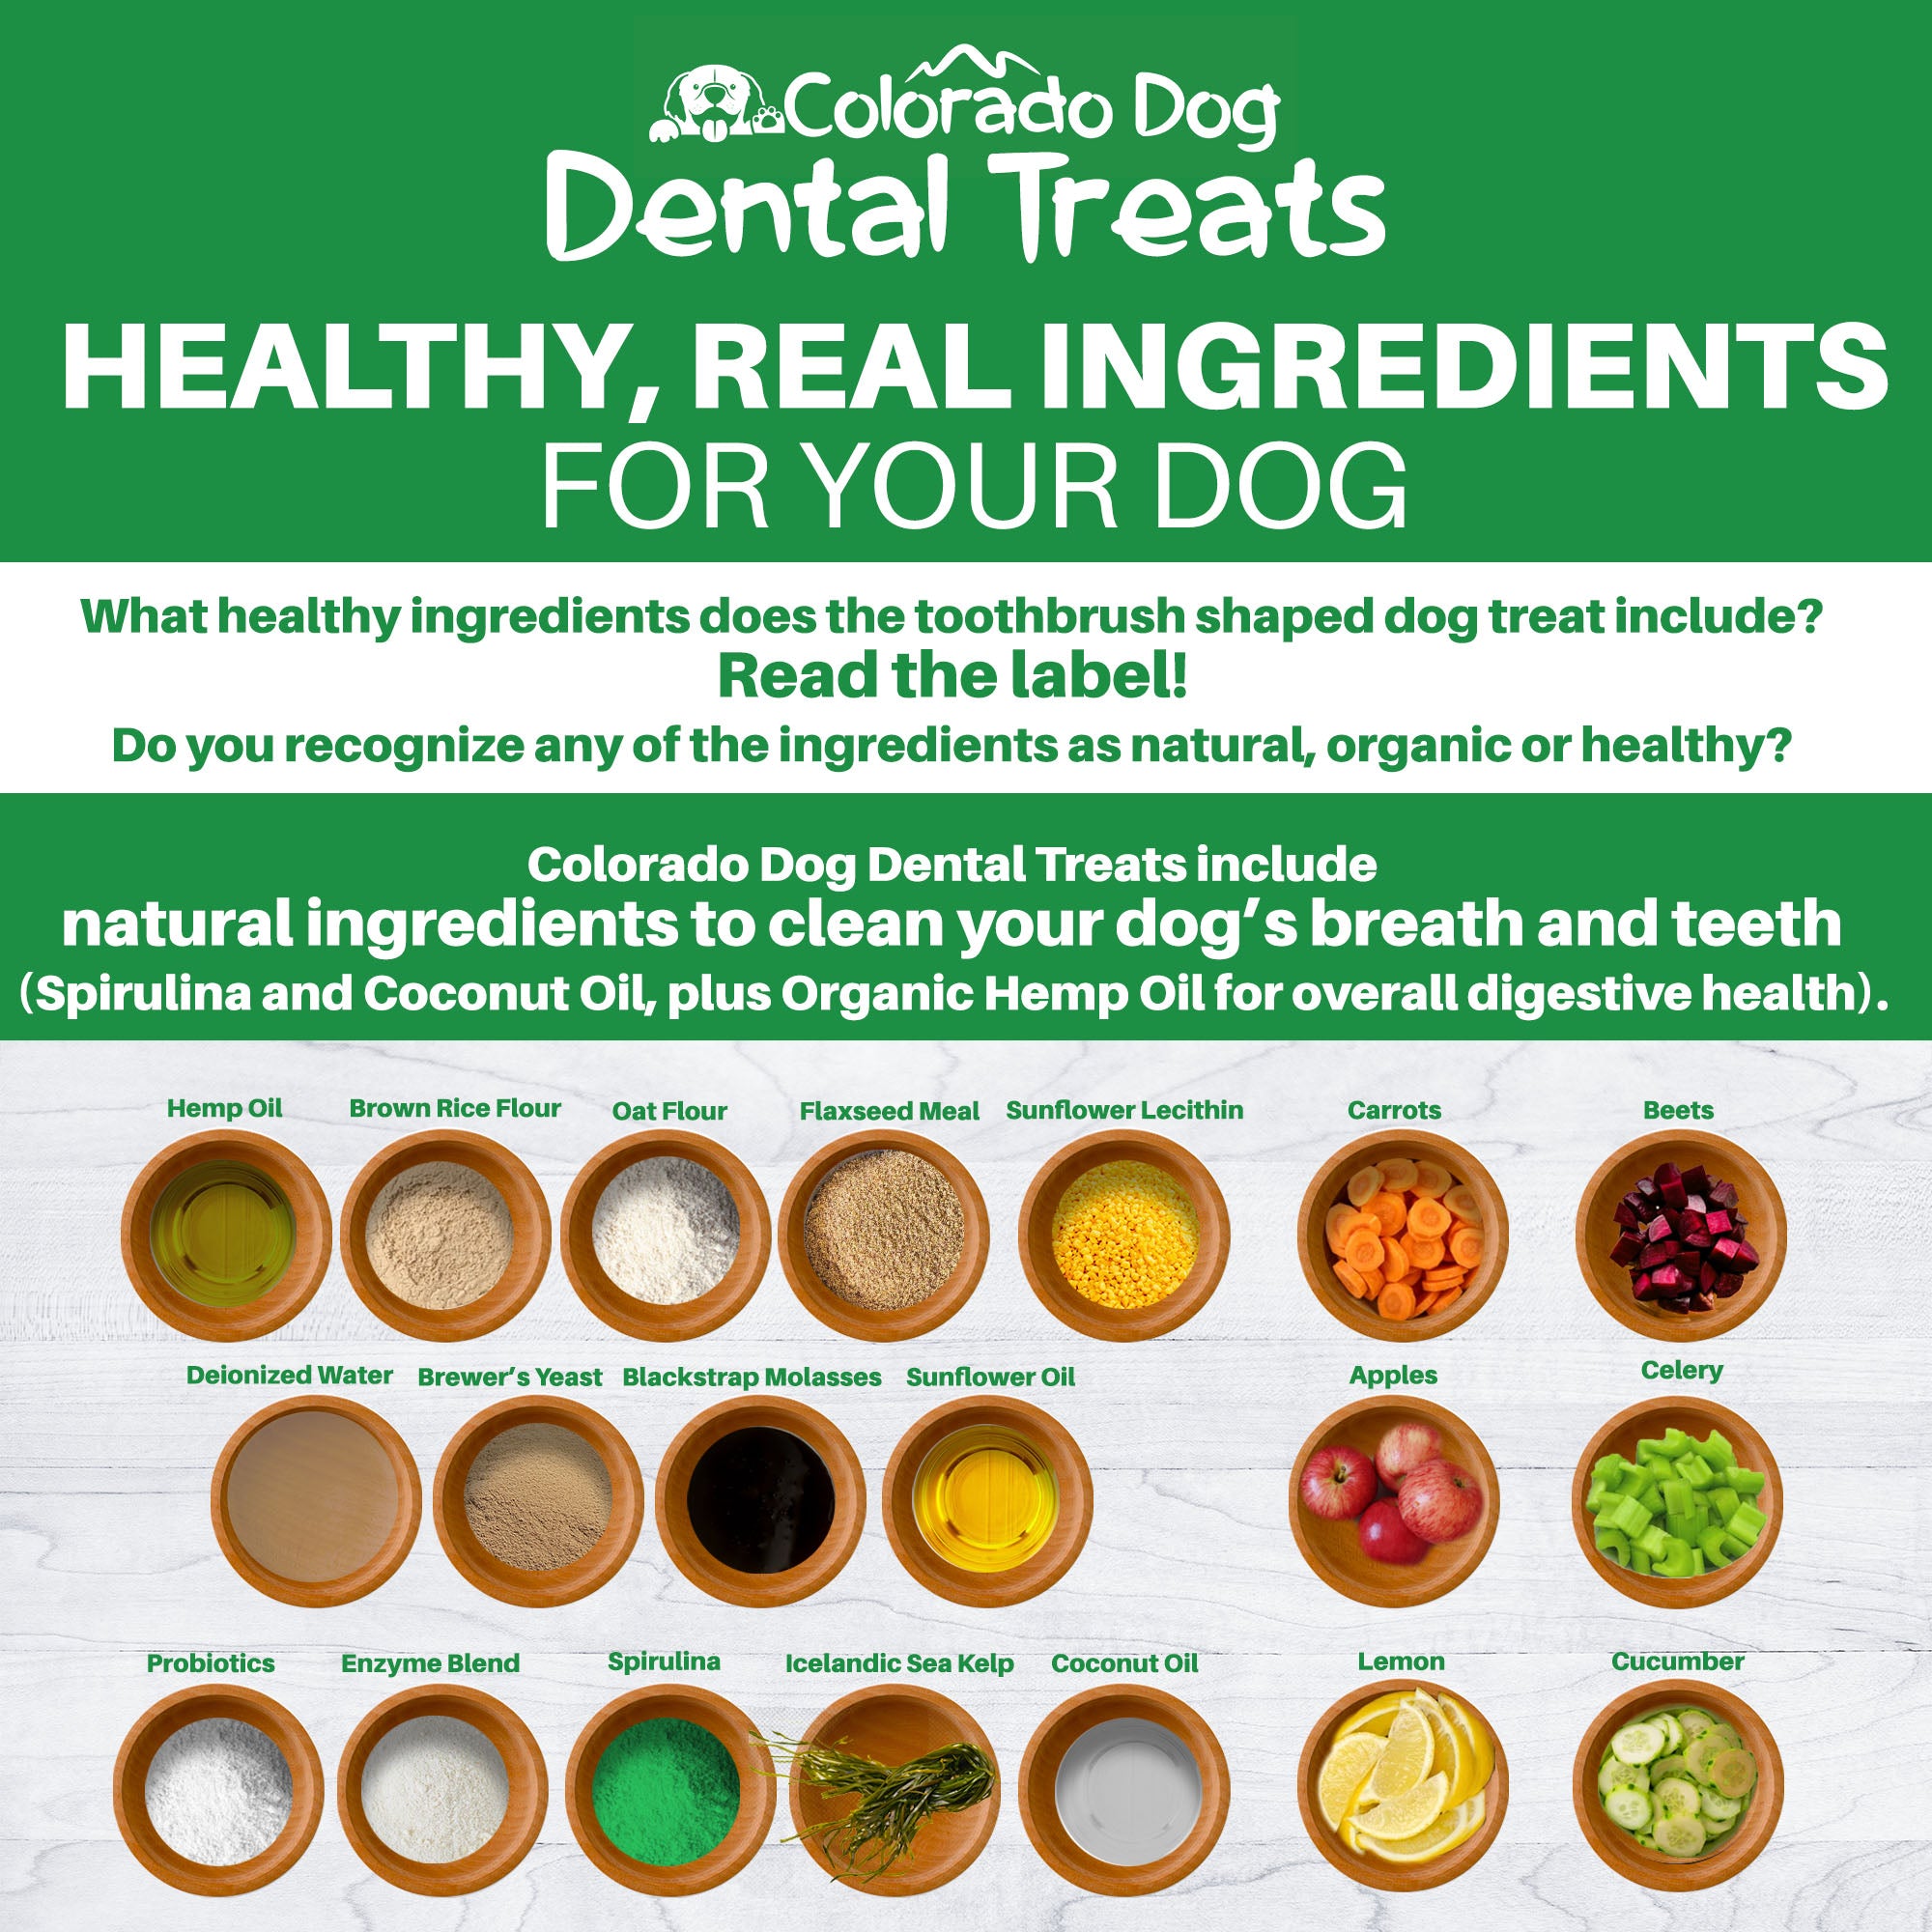 Colorado Dog Dental Dog Treats - with Coconut Oil, Spirulina and Hemp – Compare Ingredients & Cost – a 100% Natural, Effective Dog Dental Chew, Not a Fake Dog Toothbrush